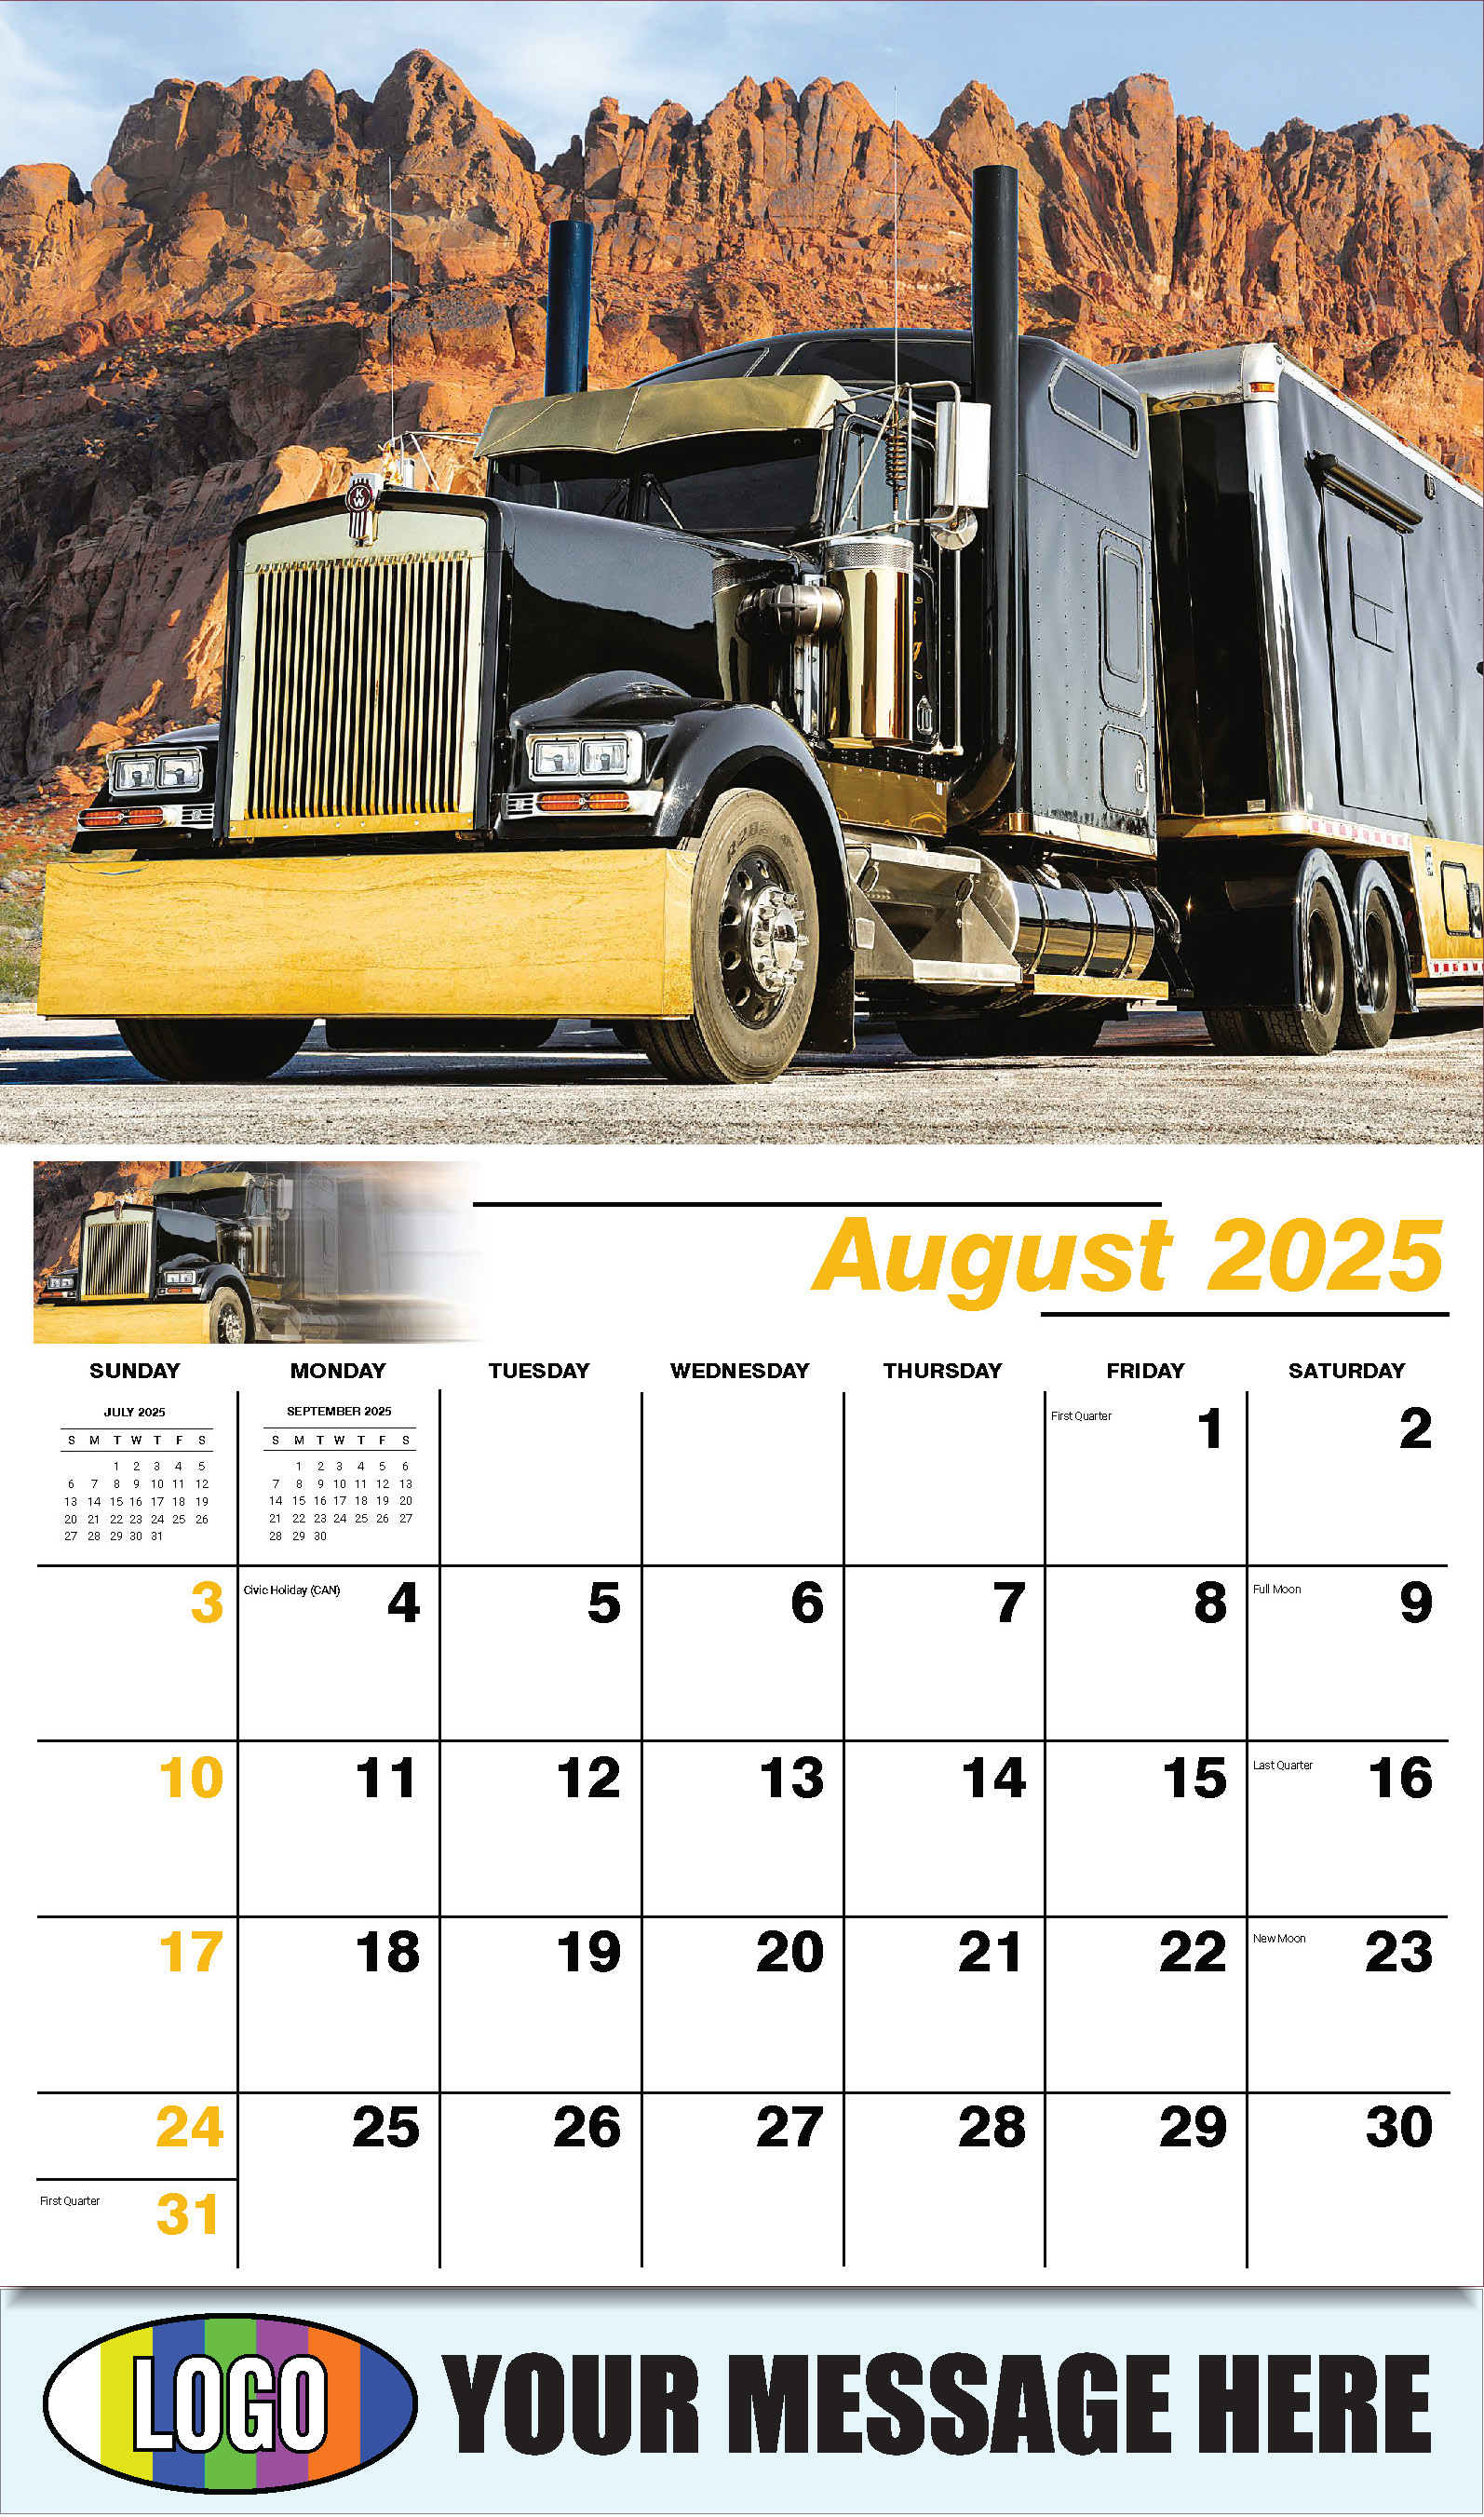 Kings of the Road 2025 Automotive Business Promotional Calendar - August